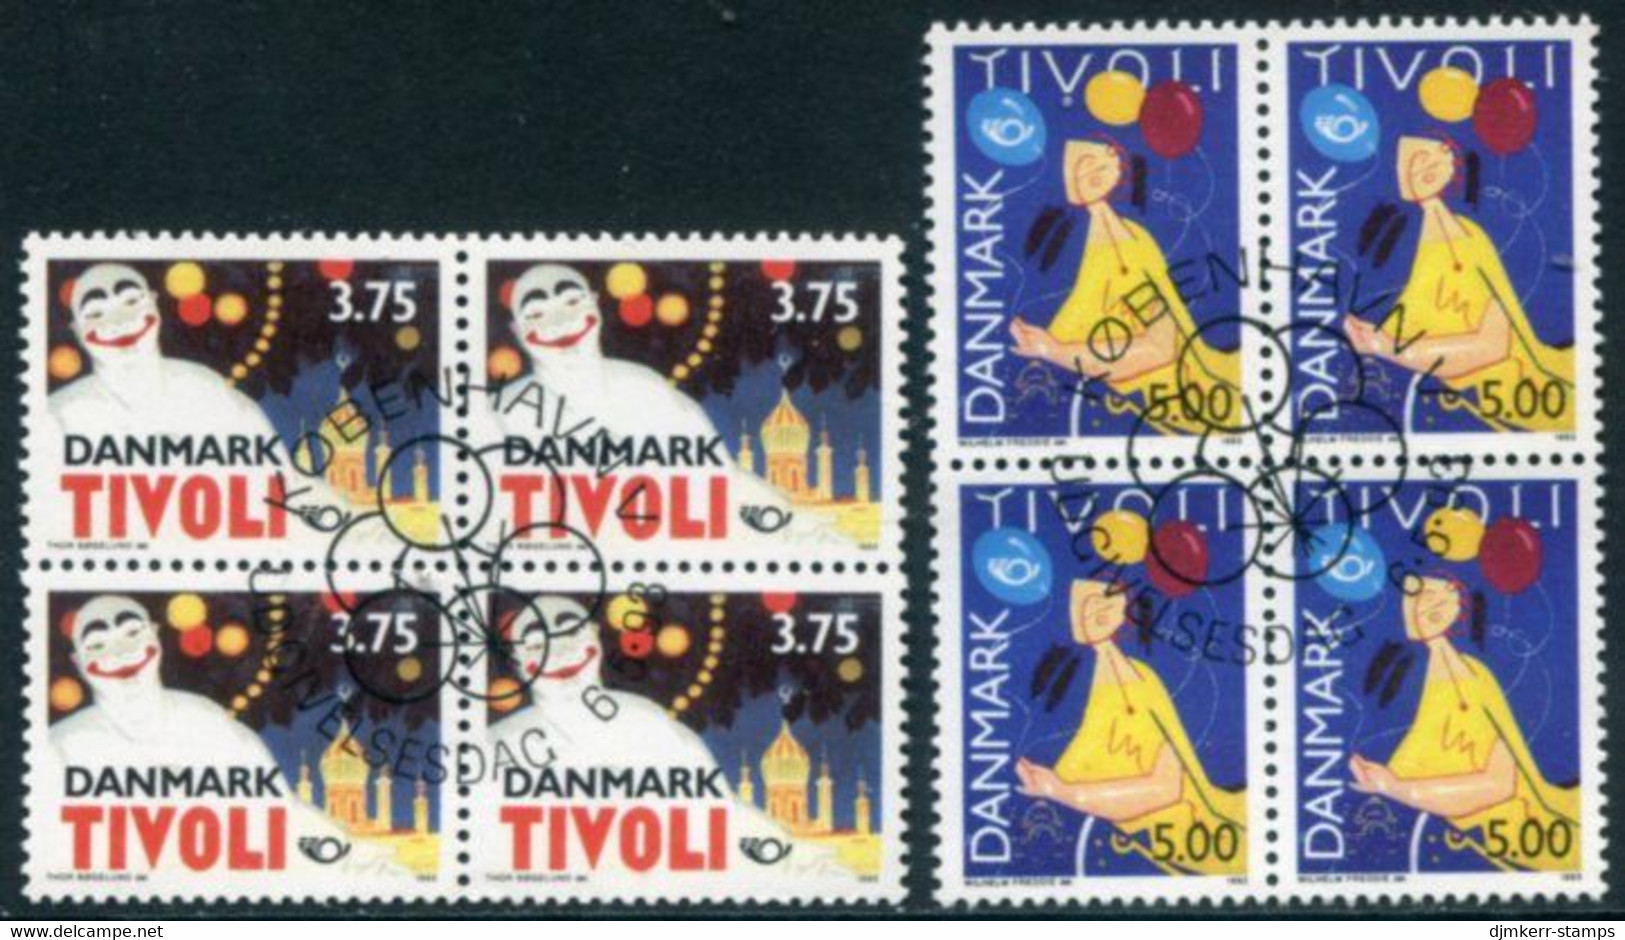 DENMARK 1993 Tourist Attractions: Tivoli Blocks Of 4 Used   Michel 1054-55 - Used Stamps